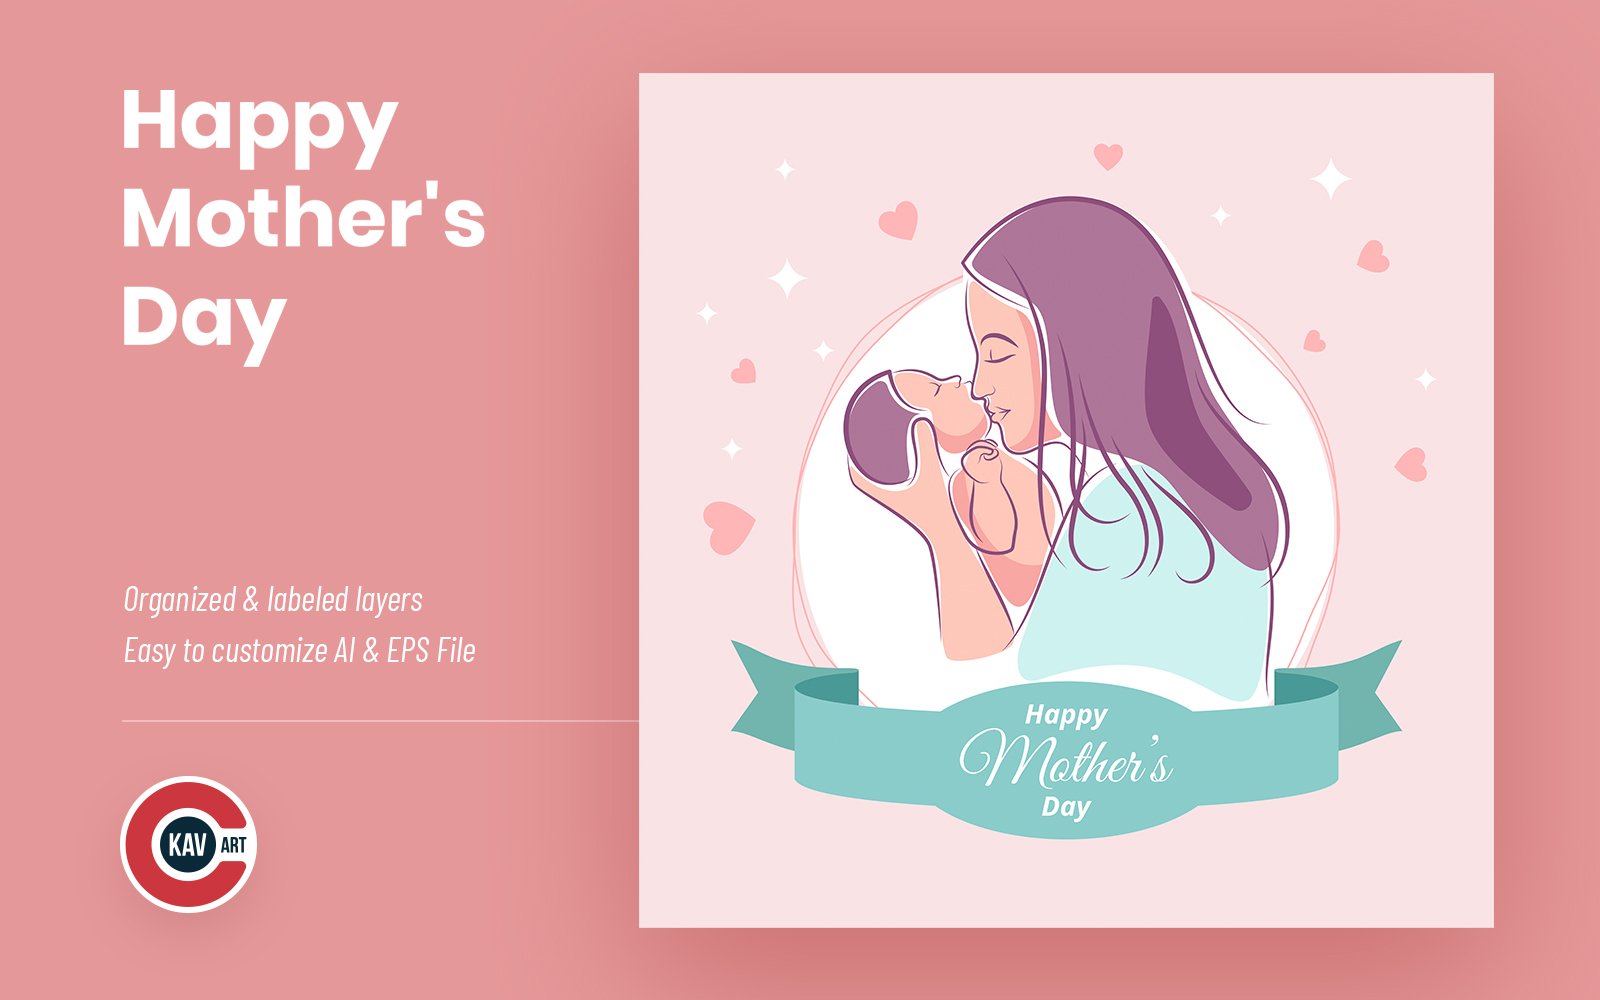 Happy Mother's Day Social Media Banner